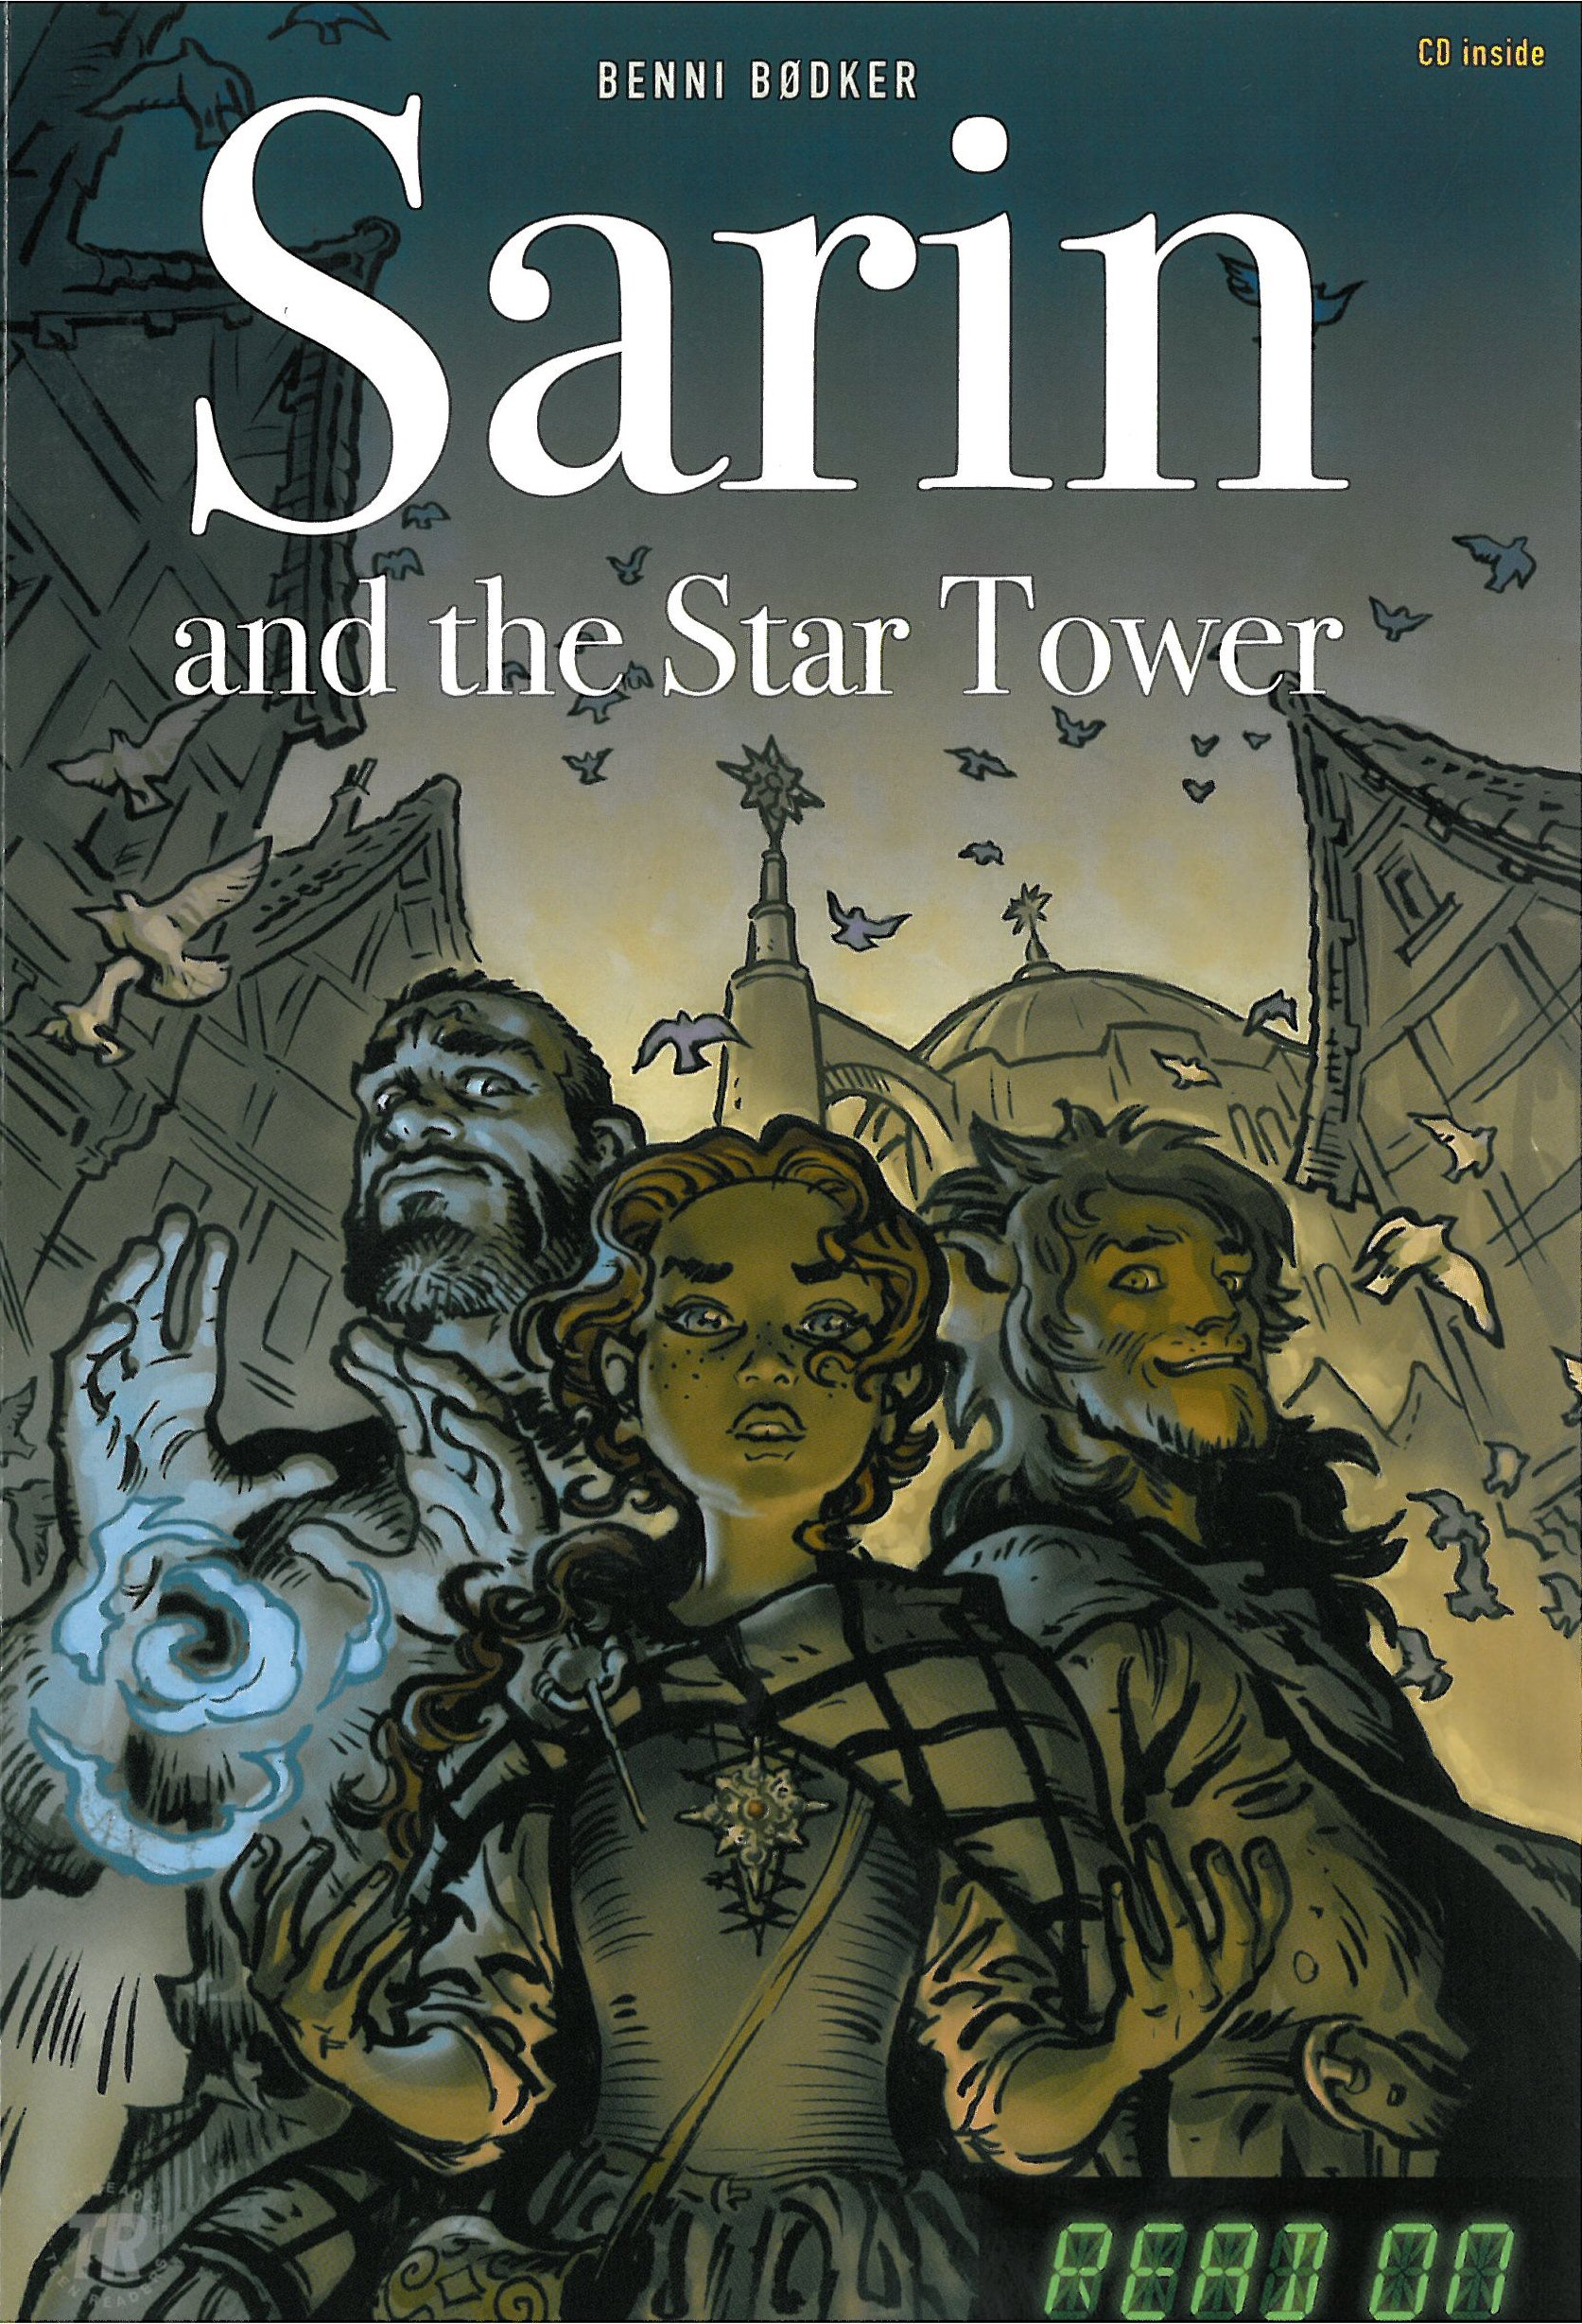 Sarin and the Star Tower - READ ON series